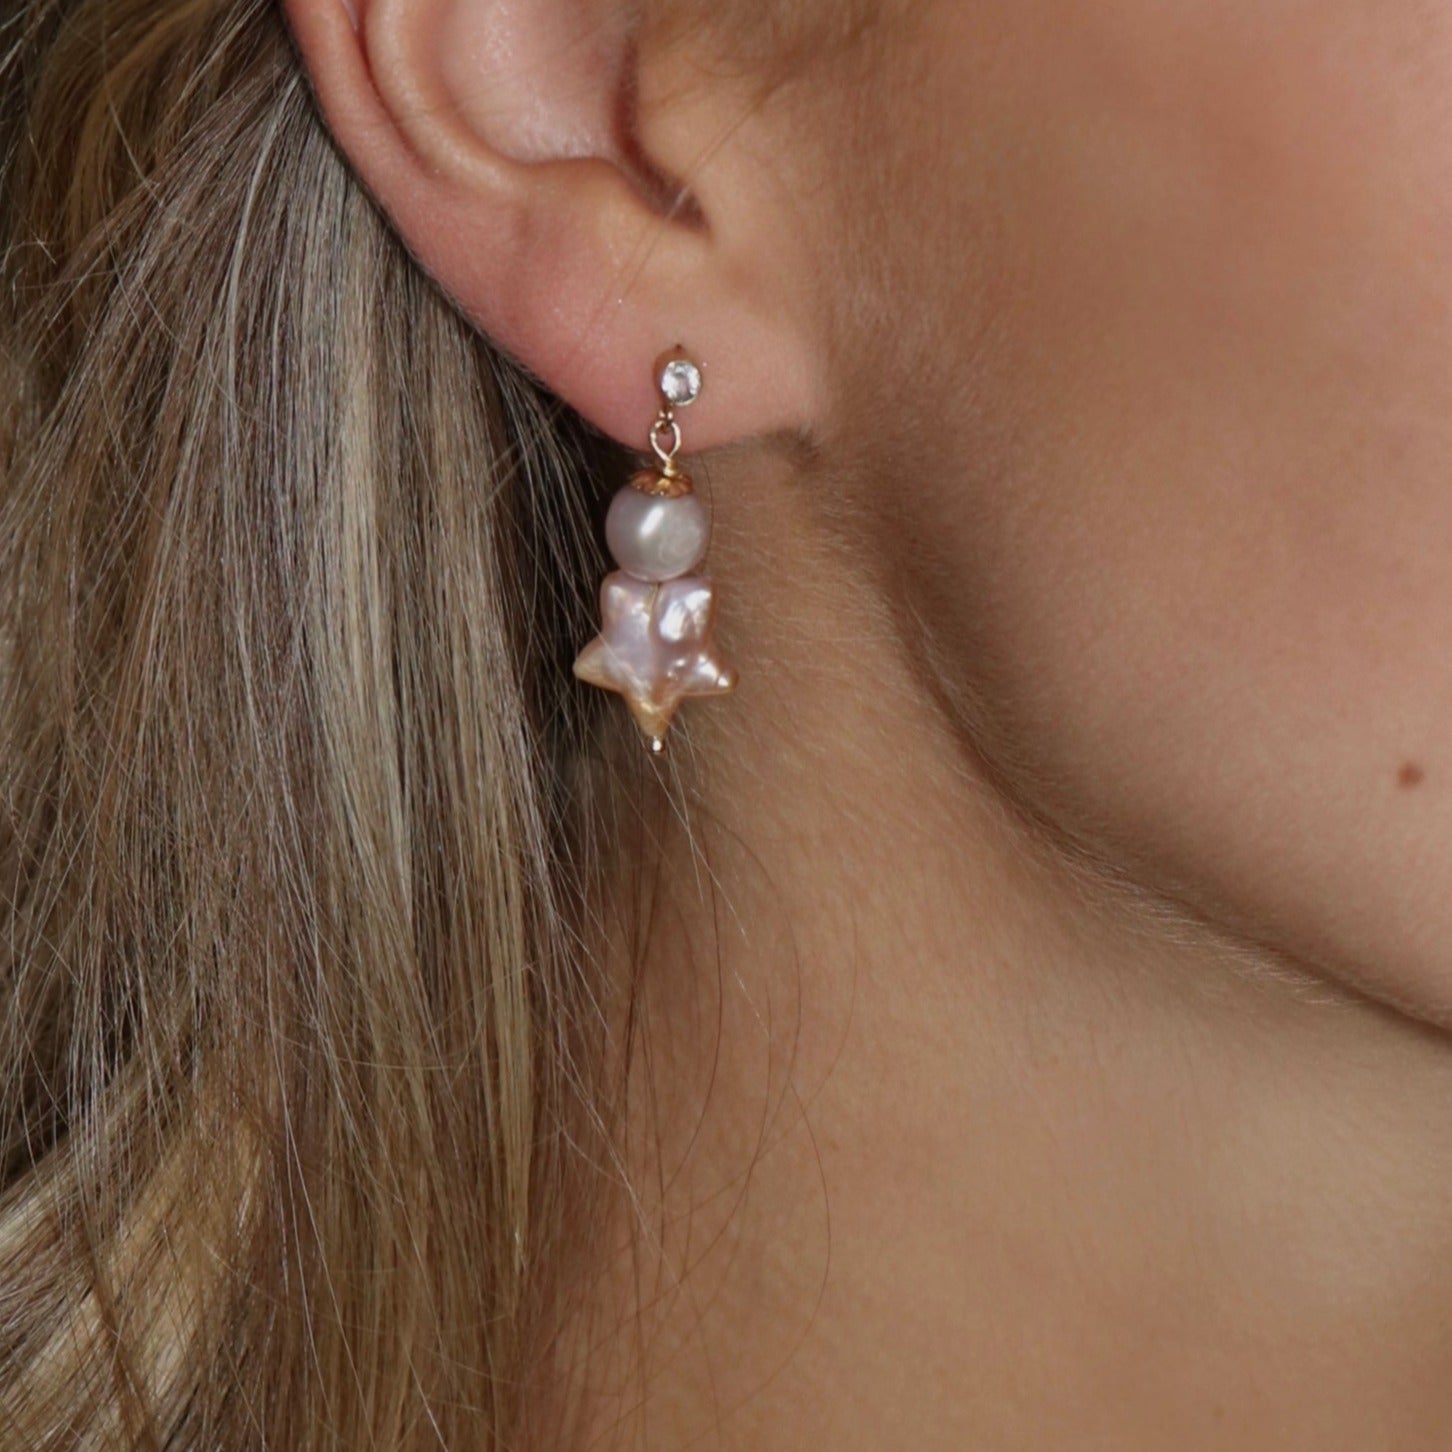  stud earrings, light pink star shaped pearl and round pearl drop earring on topaz stud